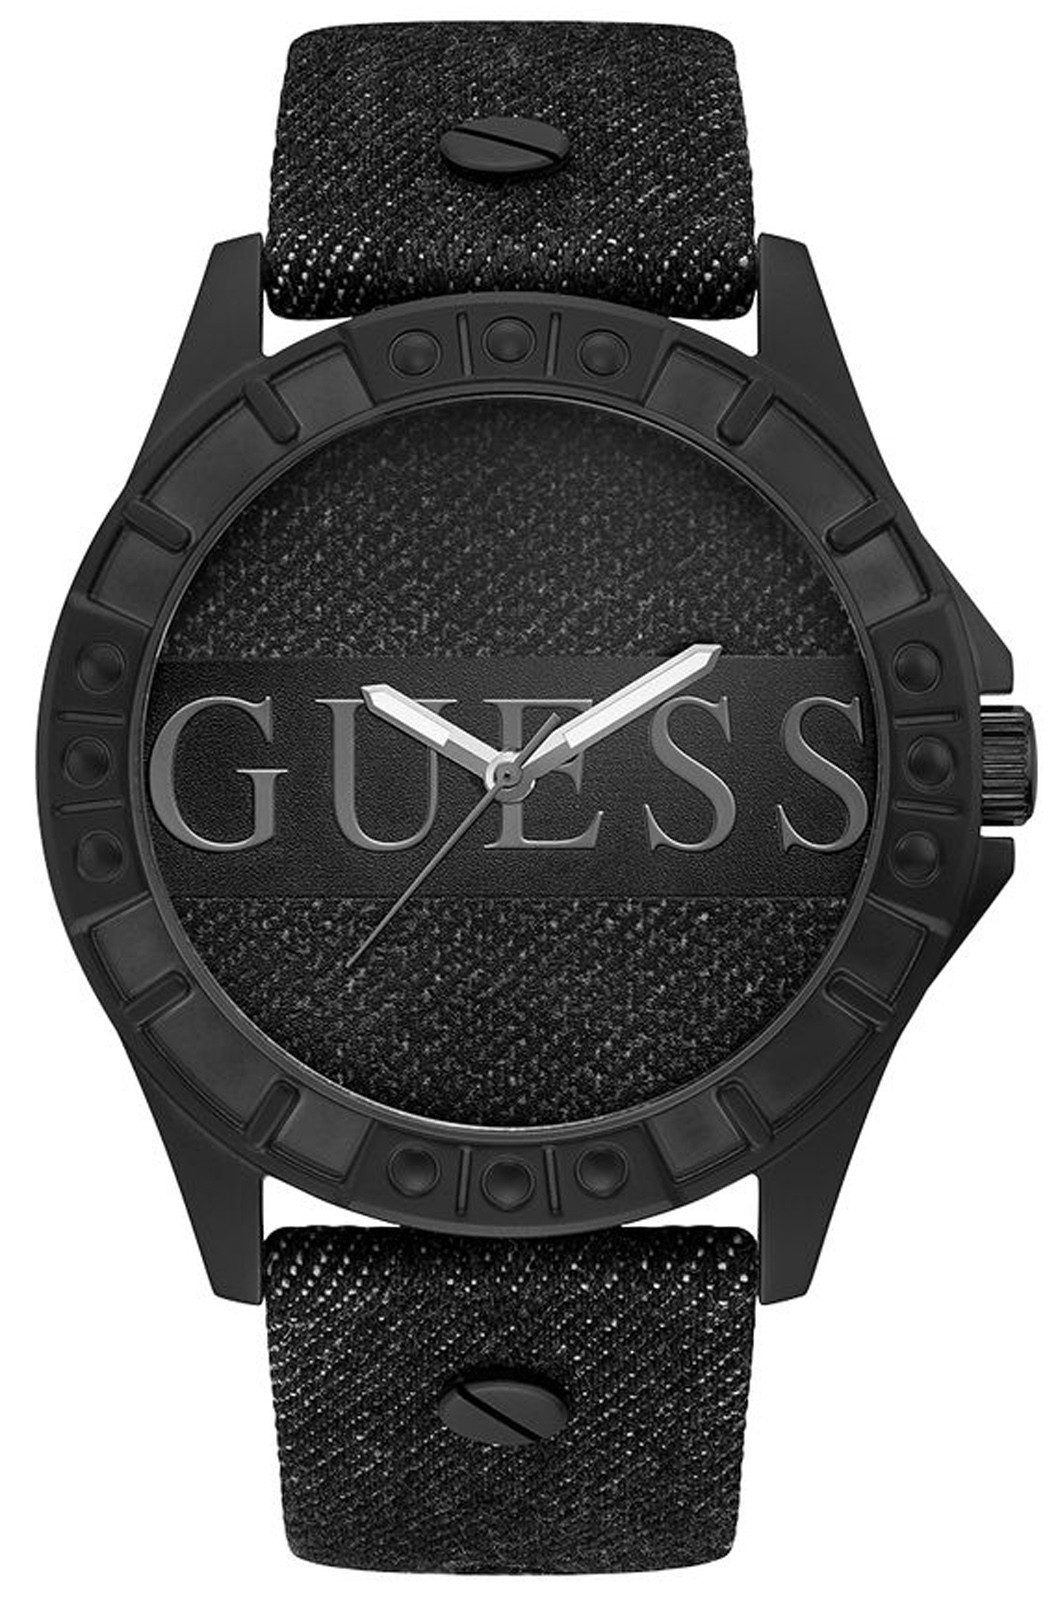 Guess Men's Watch Guess Men's Stainless Steel Case Analogue Denim Print Dial Quartz Movement Watch with Denim Finish Leather Strap 139925 W1241G1 | Comprar Watch Guess Men's Stainless Steel Case Analogue